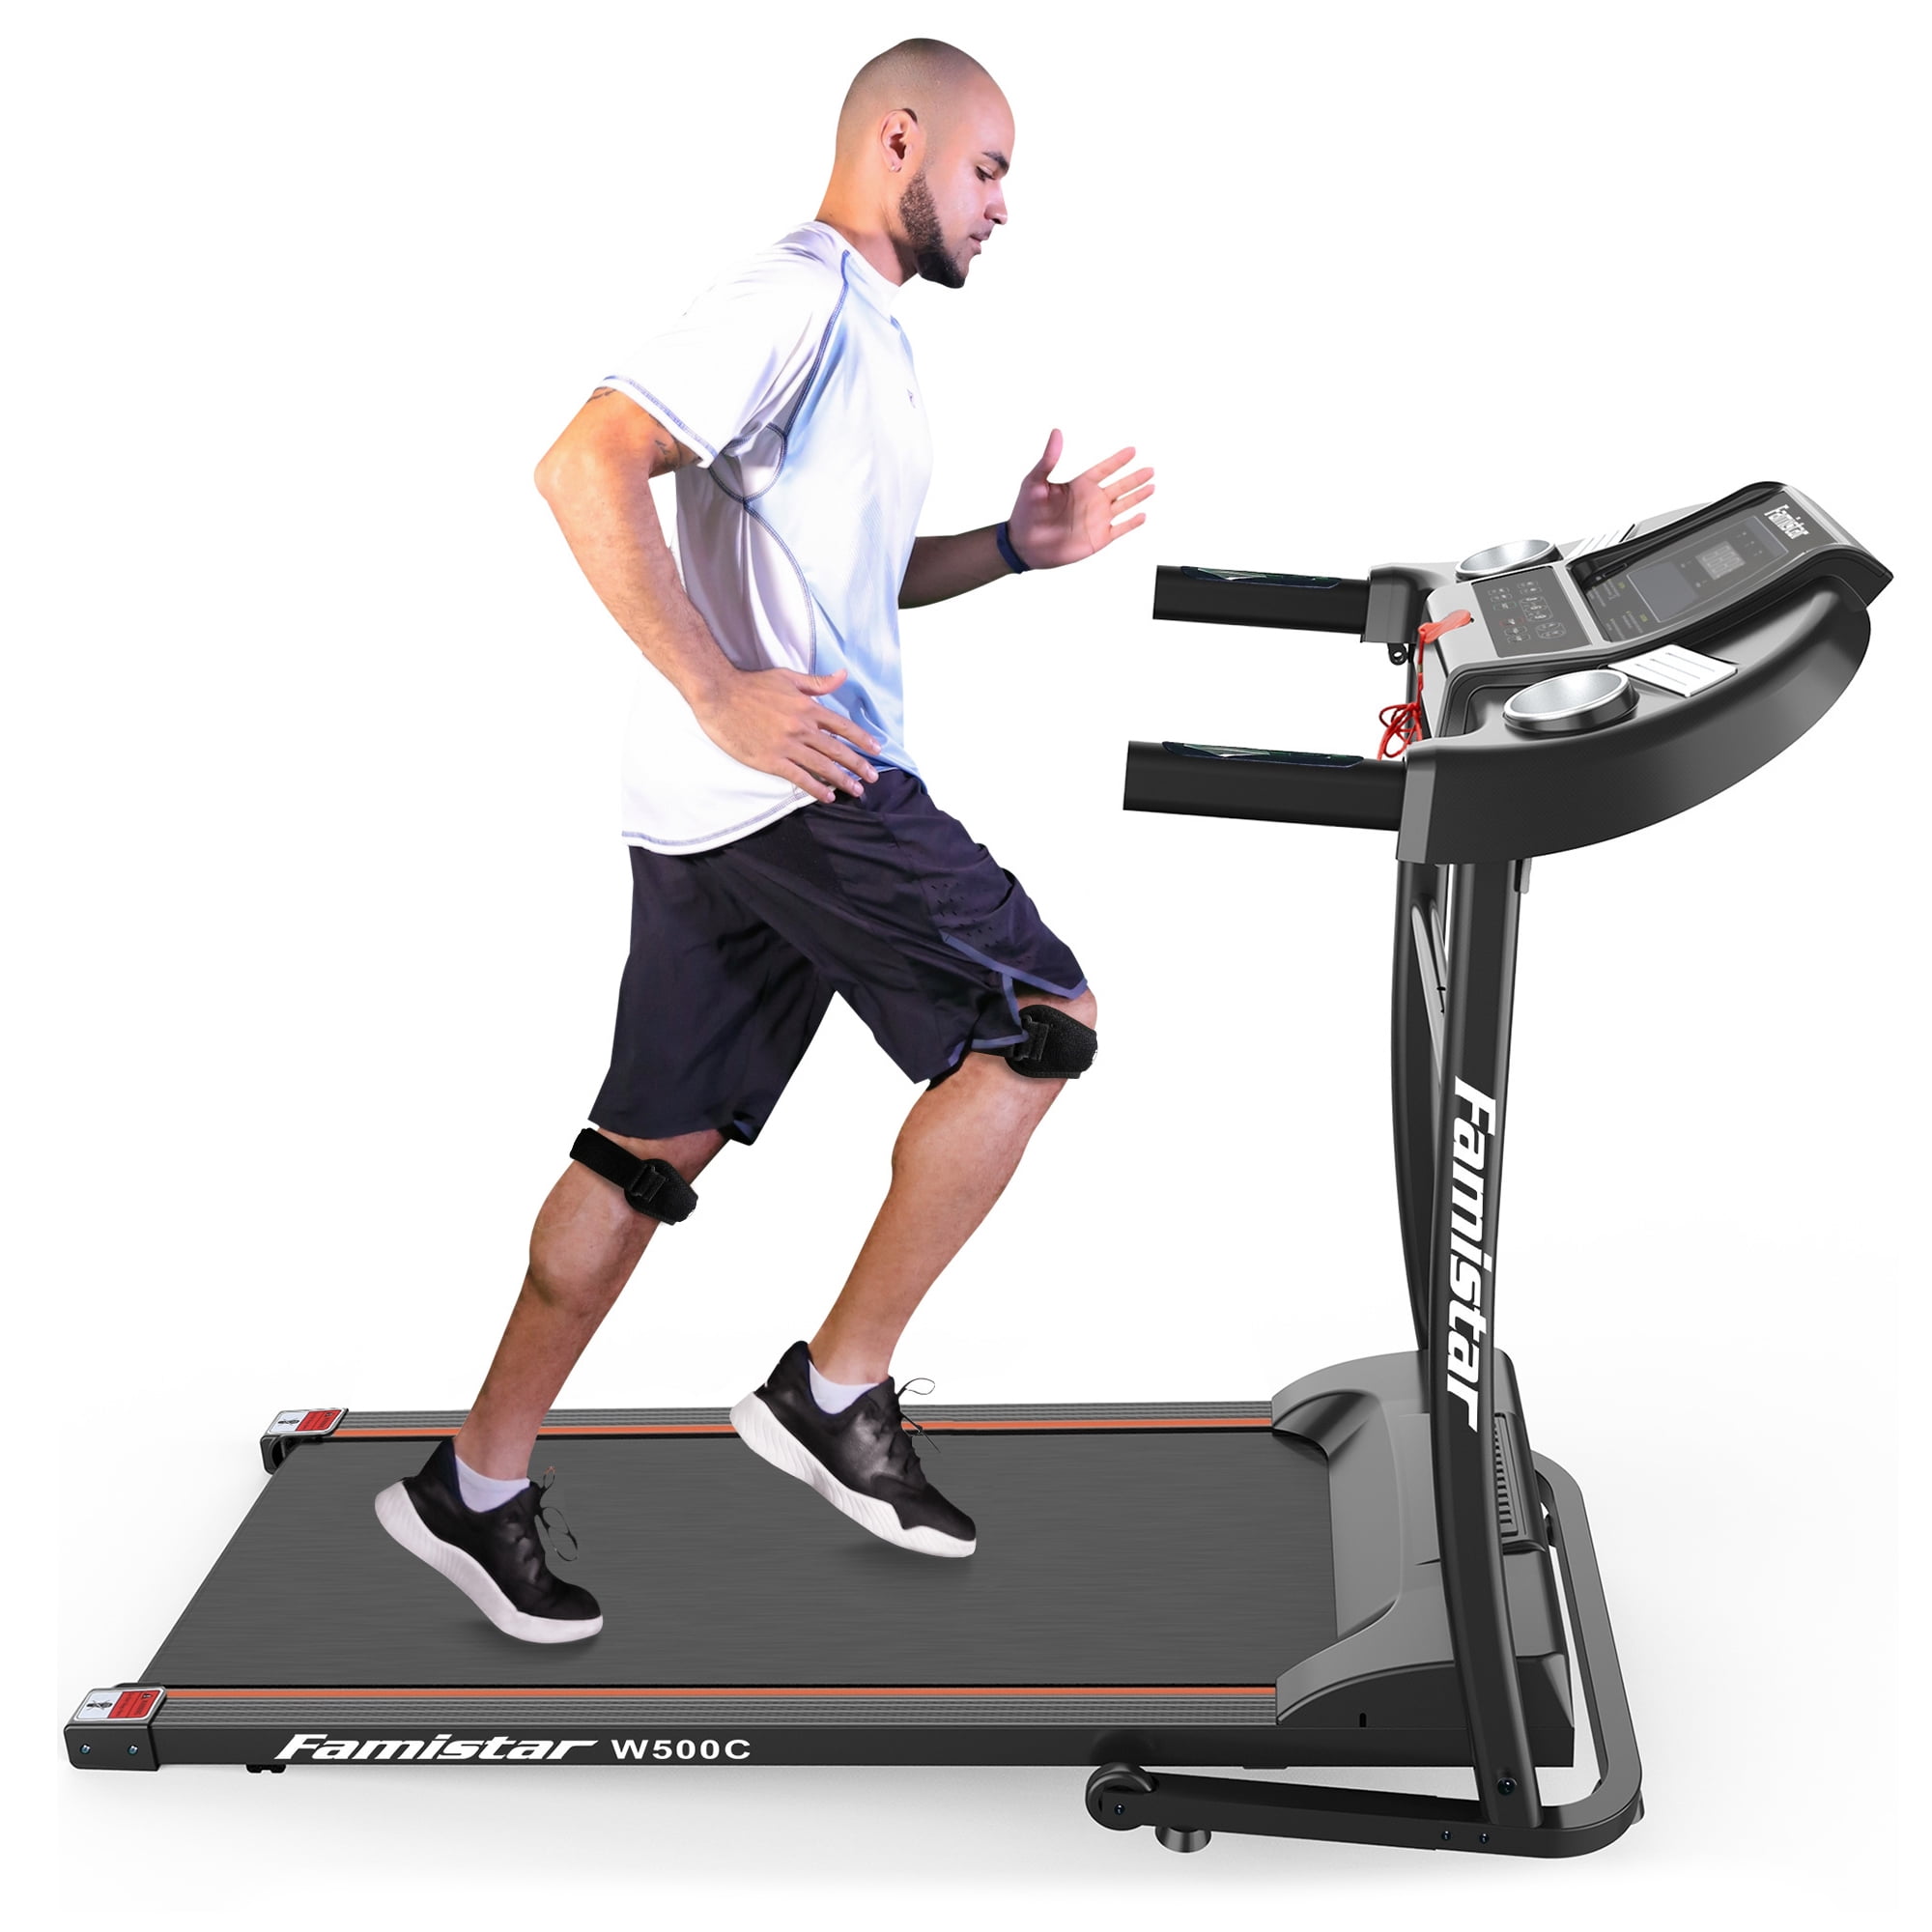 Shipment from USA, White Electric Motorized Treadmill Shock Absorption Folding Pidgey Folding Treadmill with LCD Display Portable Fitness Running Machine for Home Office Gym 